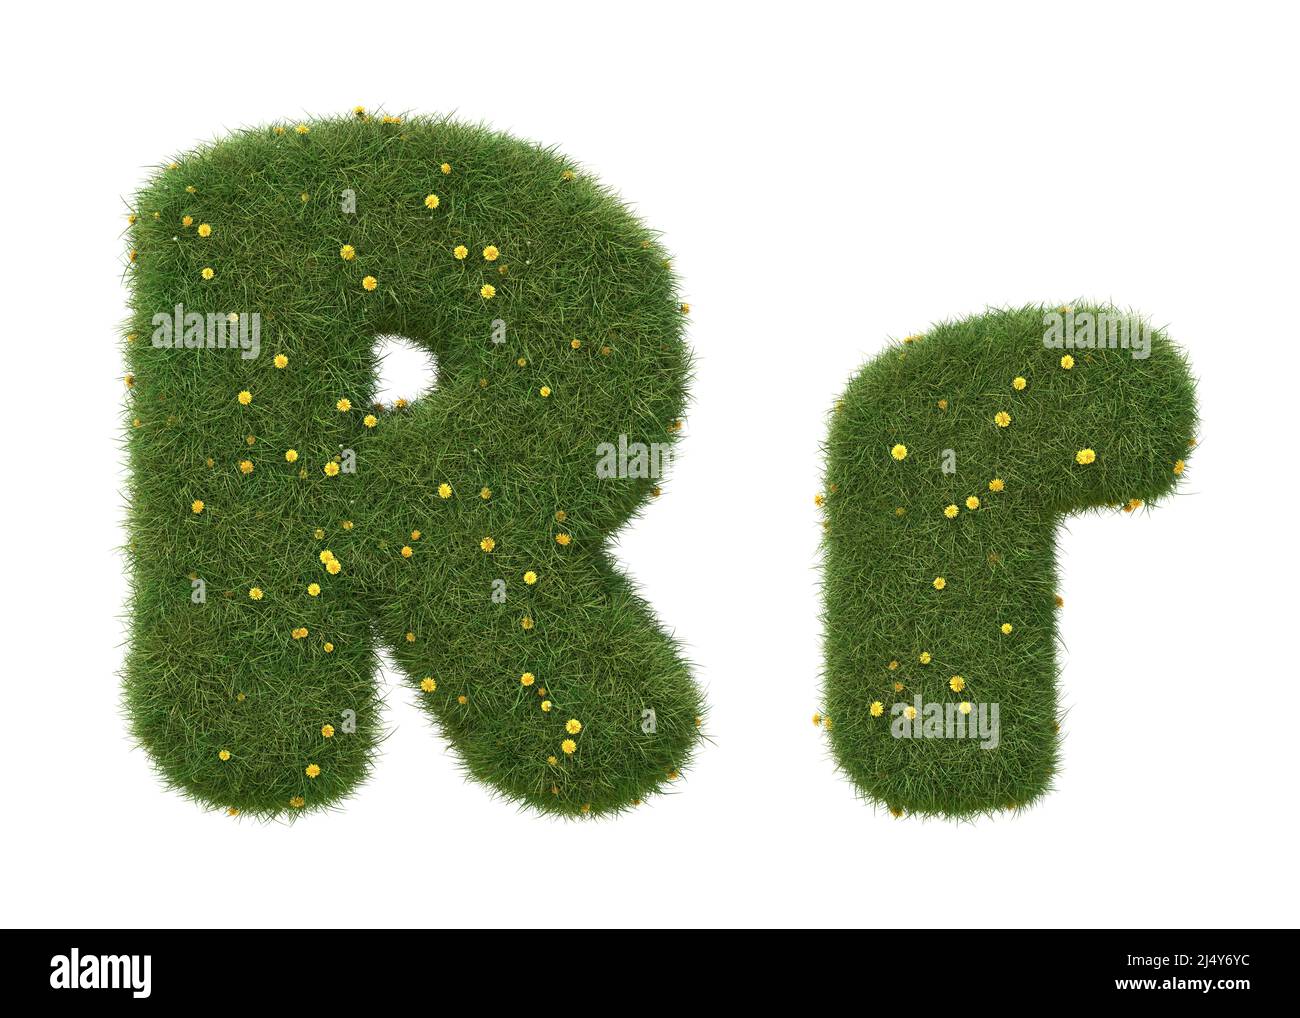 Realistic grass alphabet isolated on white background. Collection. 3D image. Stock Photo